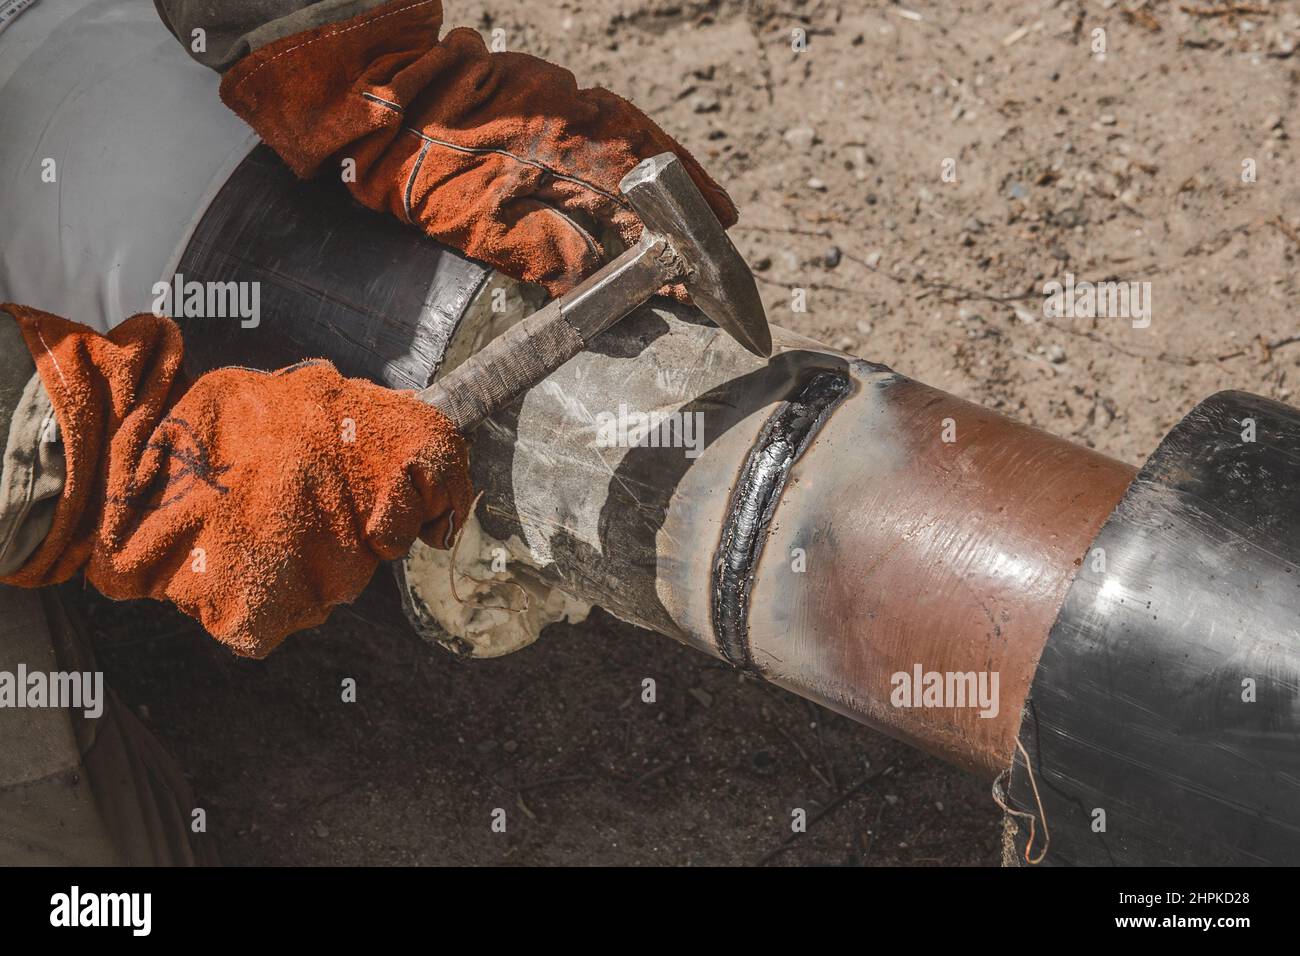 Welder with a hammer in hand and working mittens removes slag after welding industry work the polyethylene water supply main heating pipe on construct Stock Photo